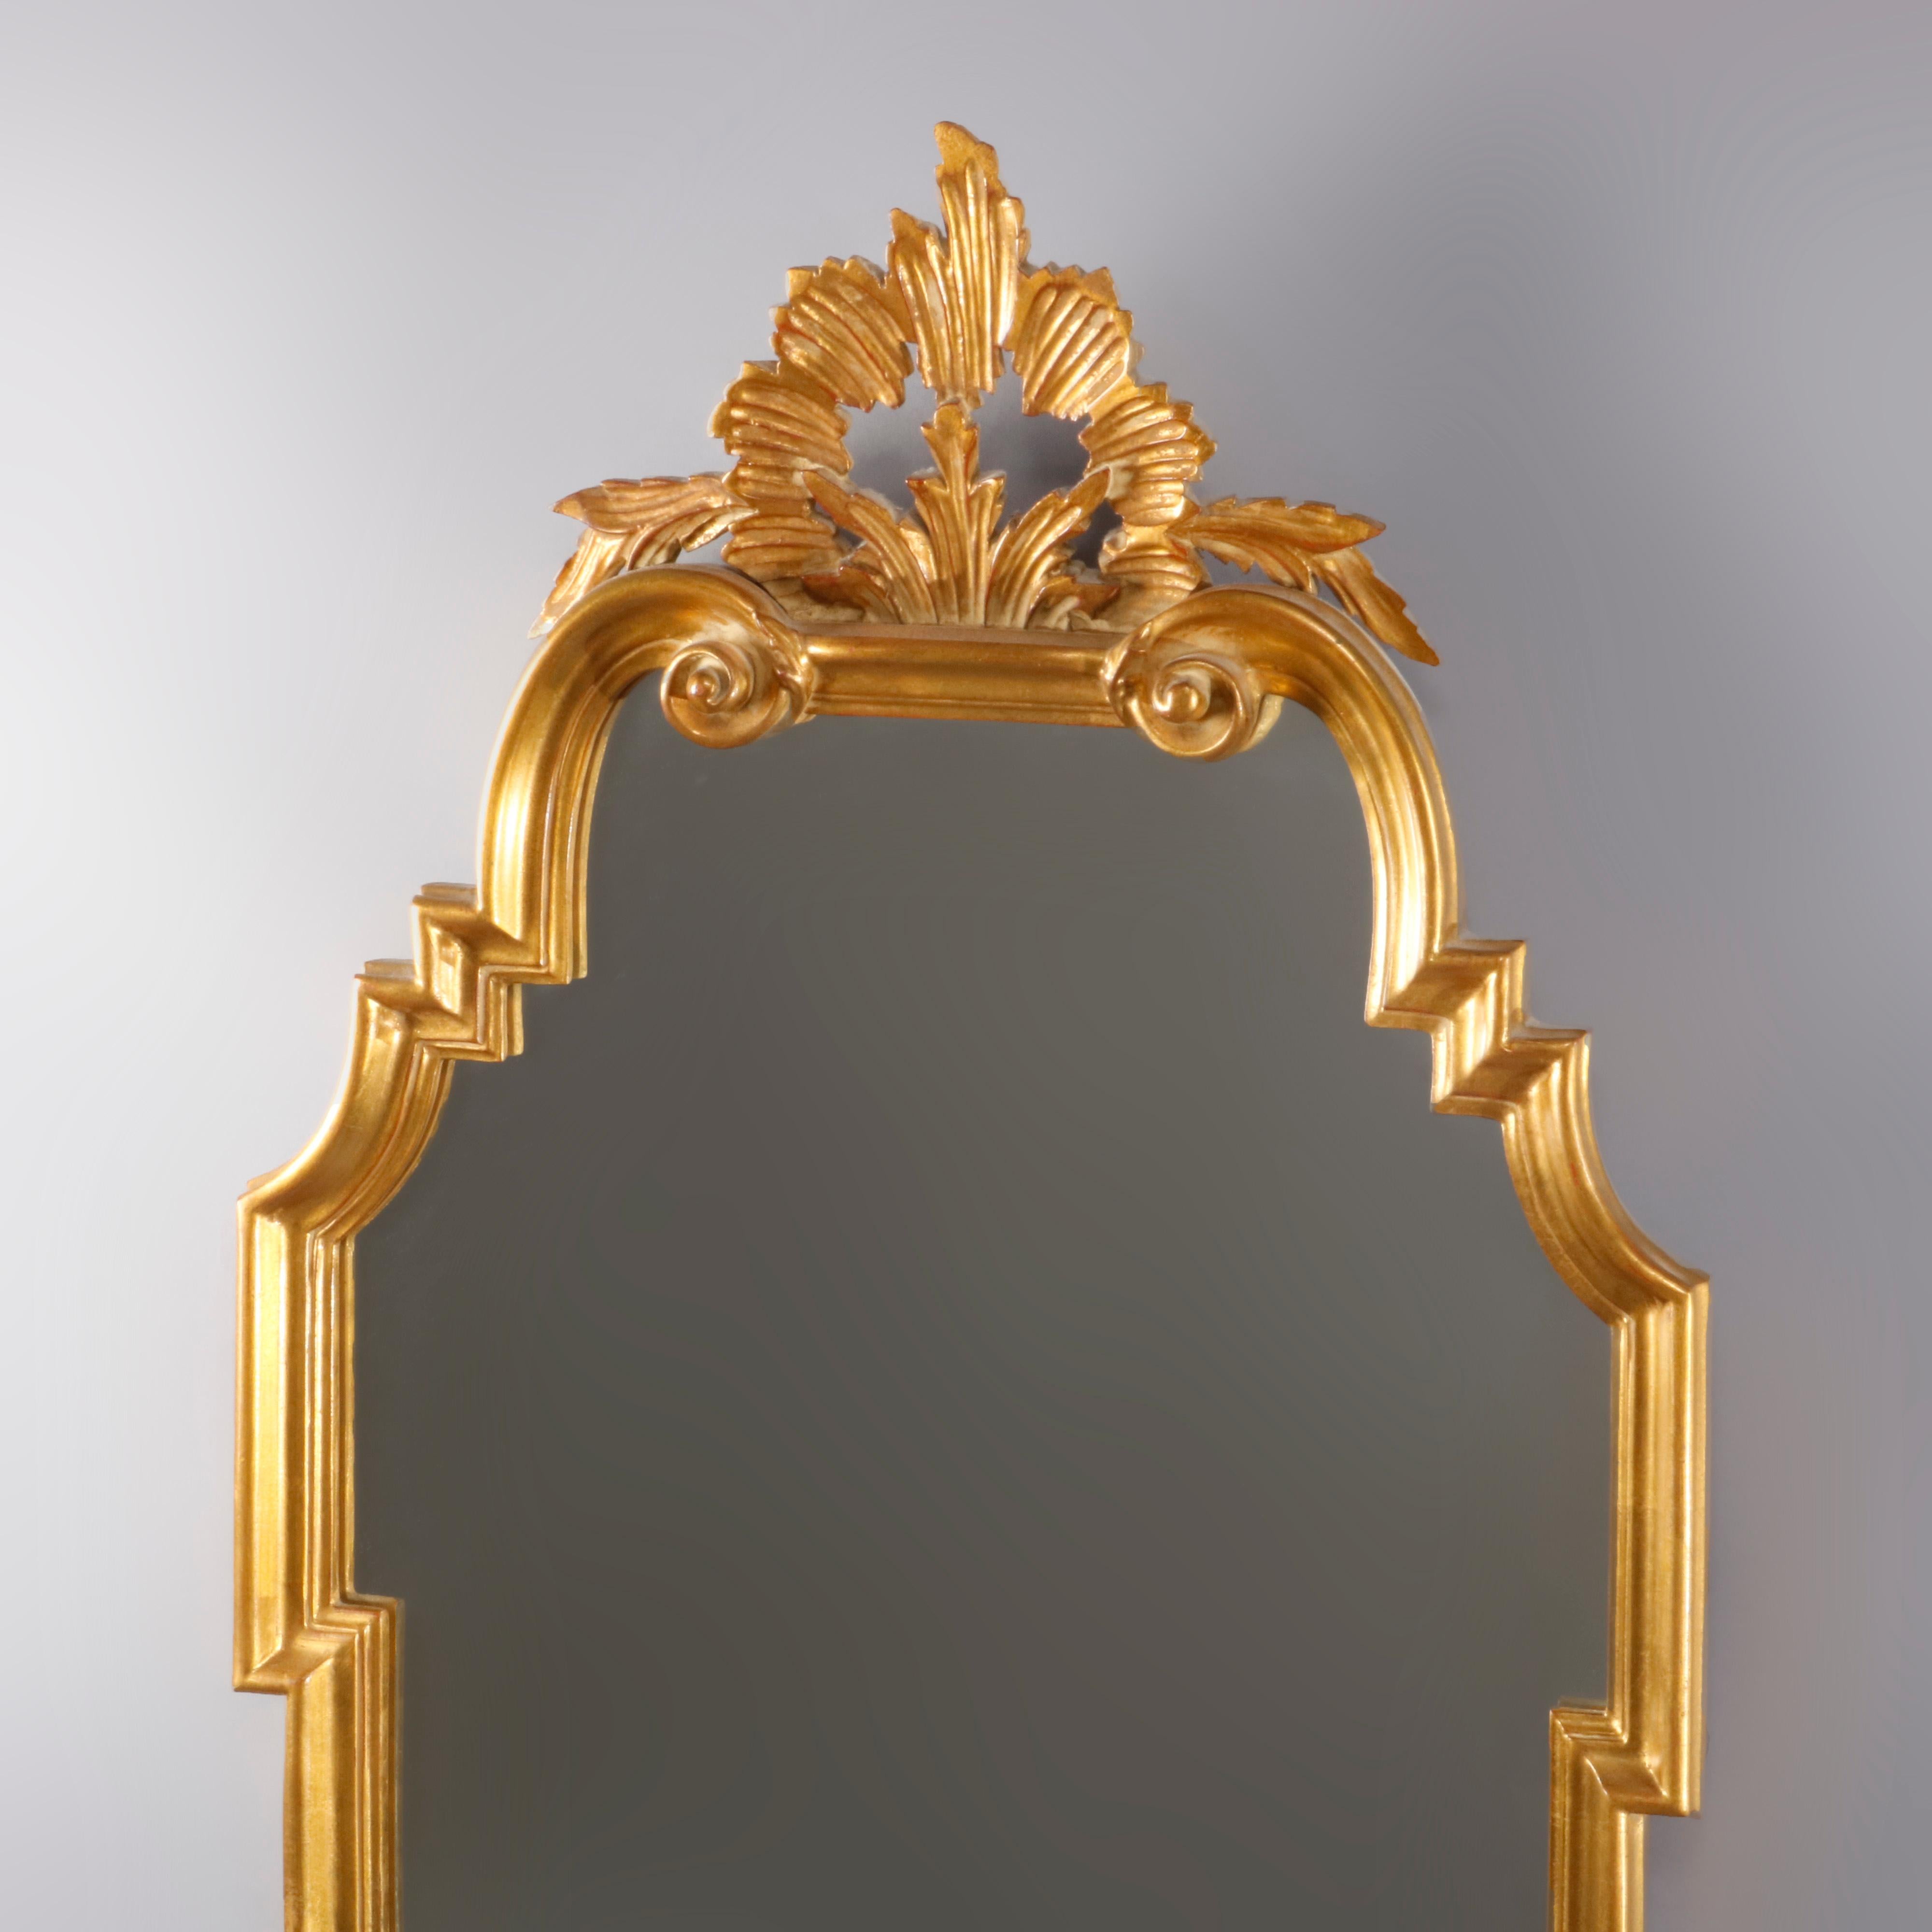 A vintage and large French Louis XVI style wall mirror by Carvers' Guild offers handcrafted giltwood frame with pierced foliate crest surmounting scrolled arch form mirror, 20th century

Measures: 47.5